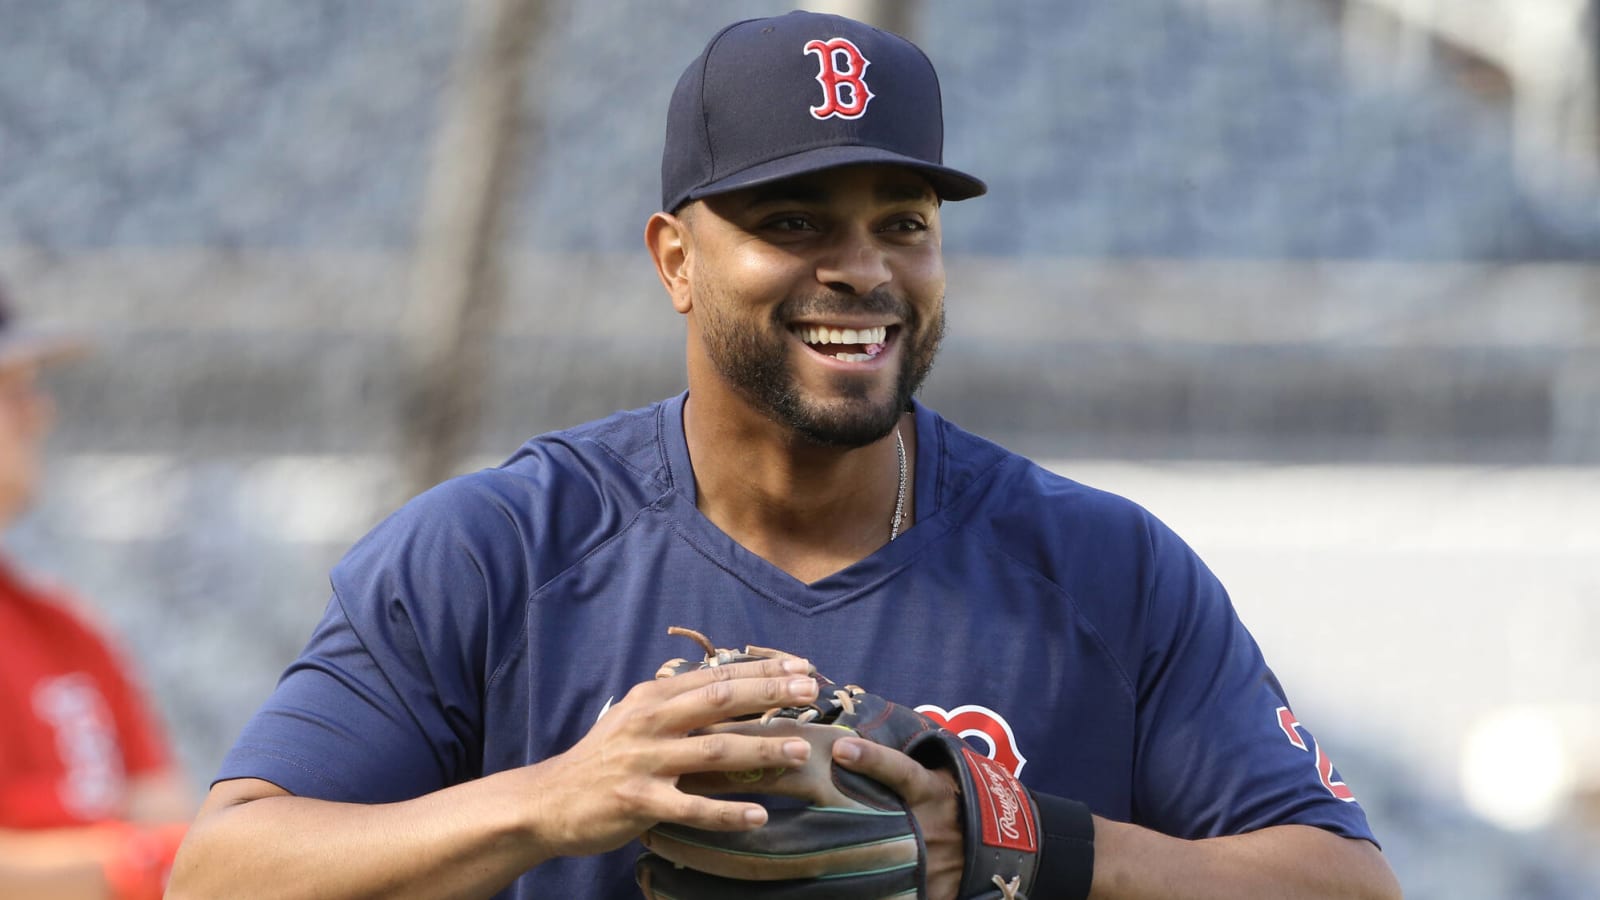 Xander Bogaerts looks to add another title with Padres - The San